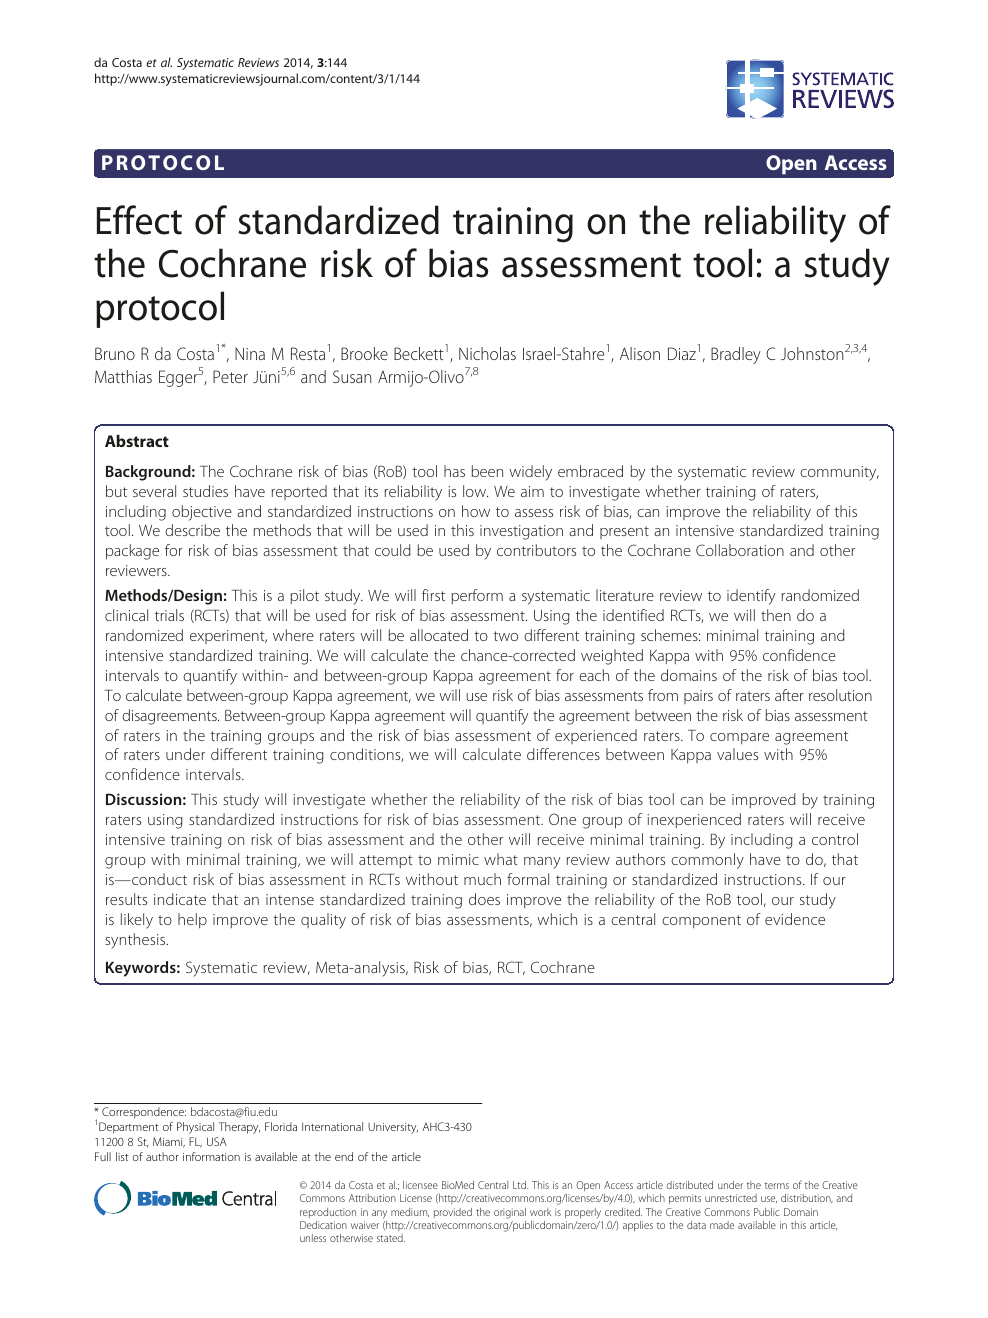 Effect Of Standardized Training On The Reliability Of The Cochrane Risk Of Bias Assessment Tool A Study Protocol Topic Of Research Paper In Psychology Download Scholarly Article Pdf And Read For